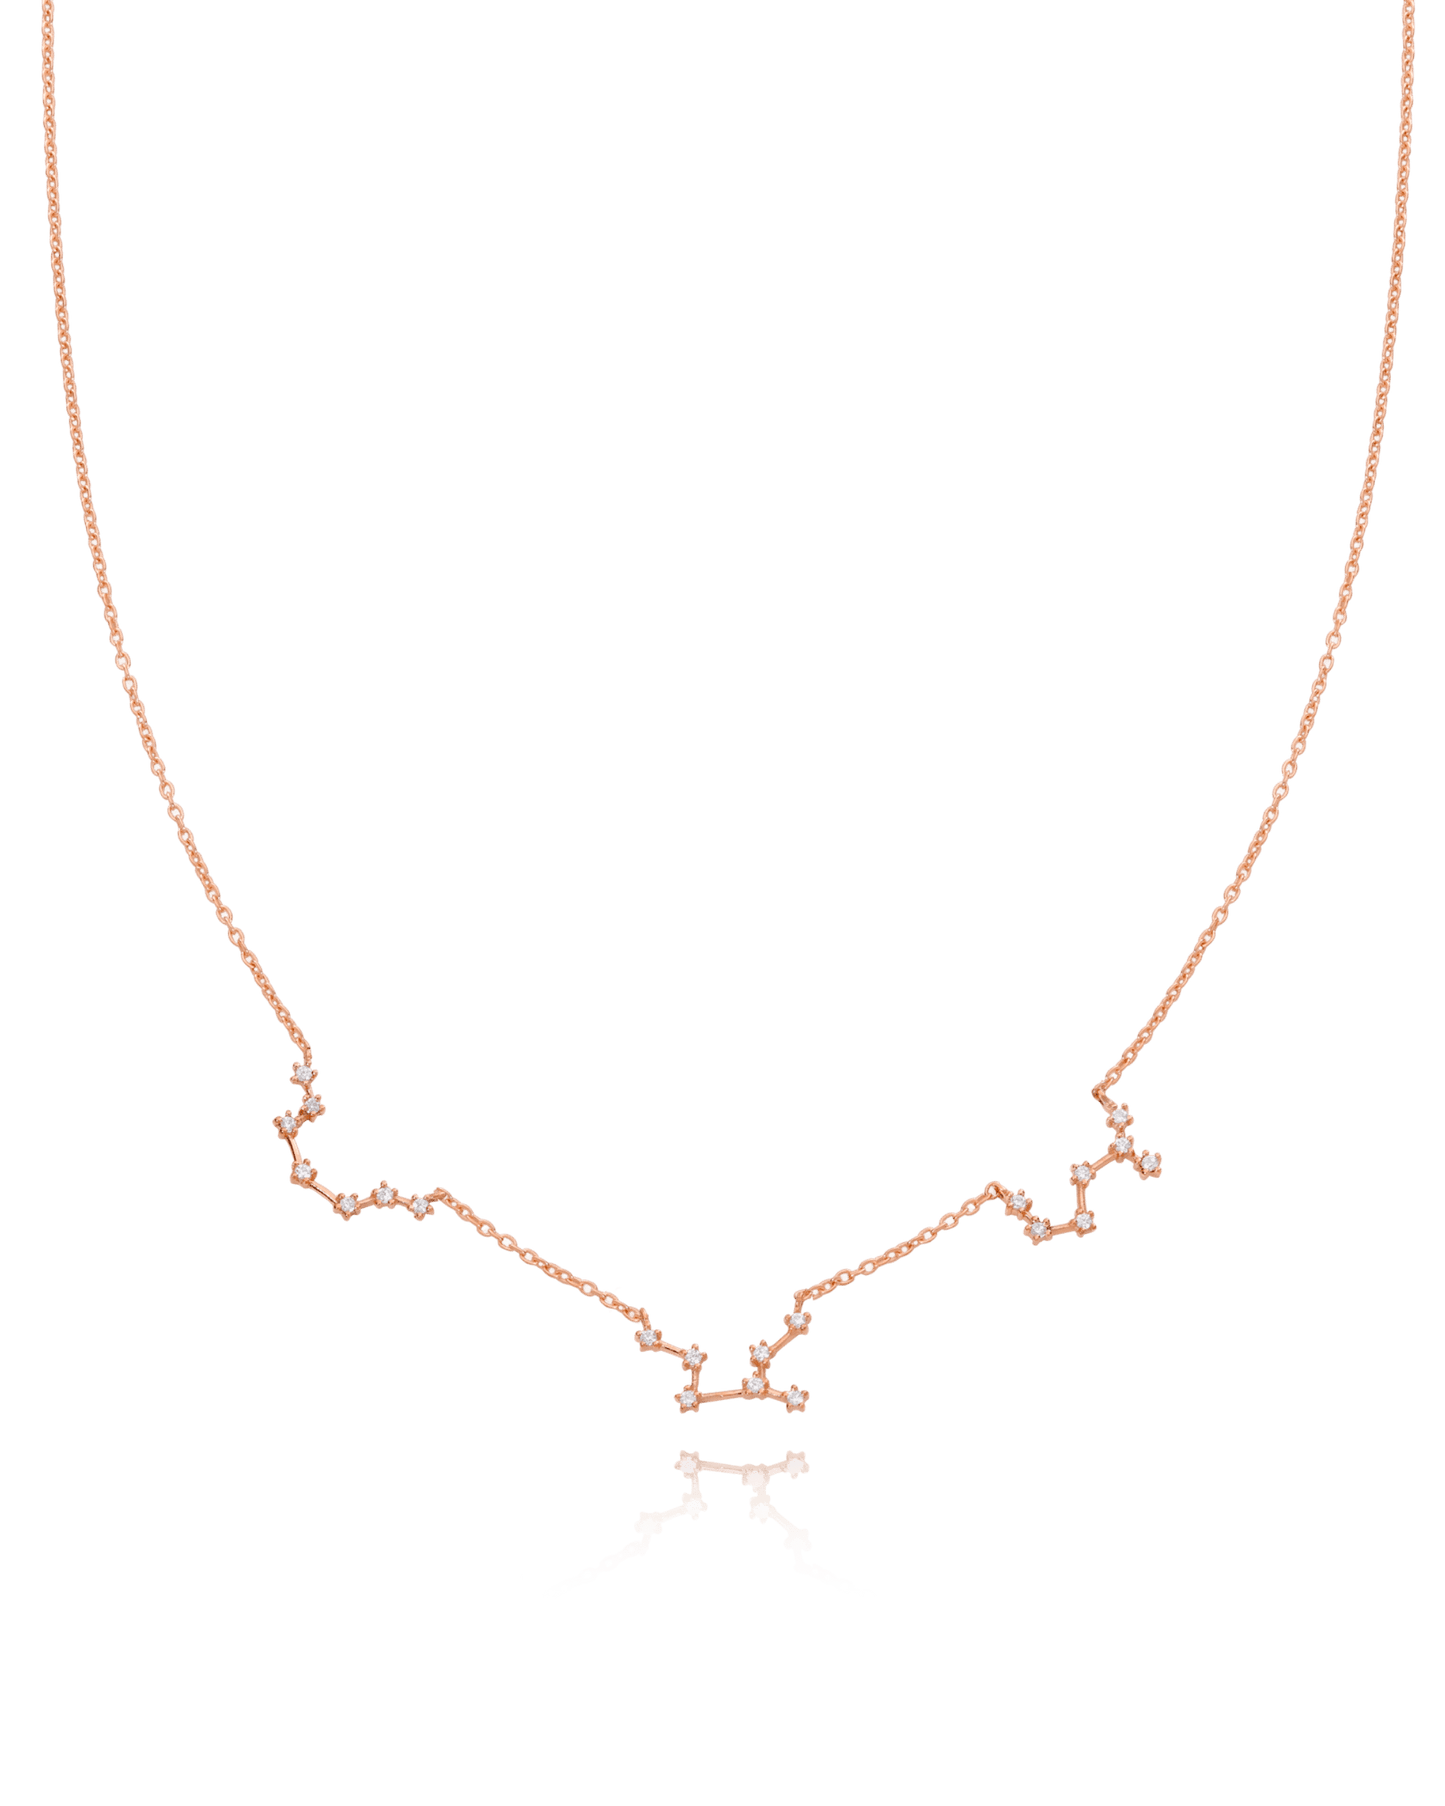 Sets of Constellation Necklaces - 925 Sterling Silver Necklaces magal-dev 